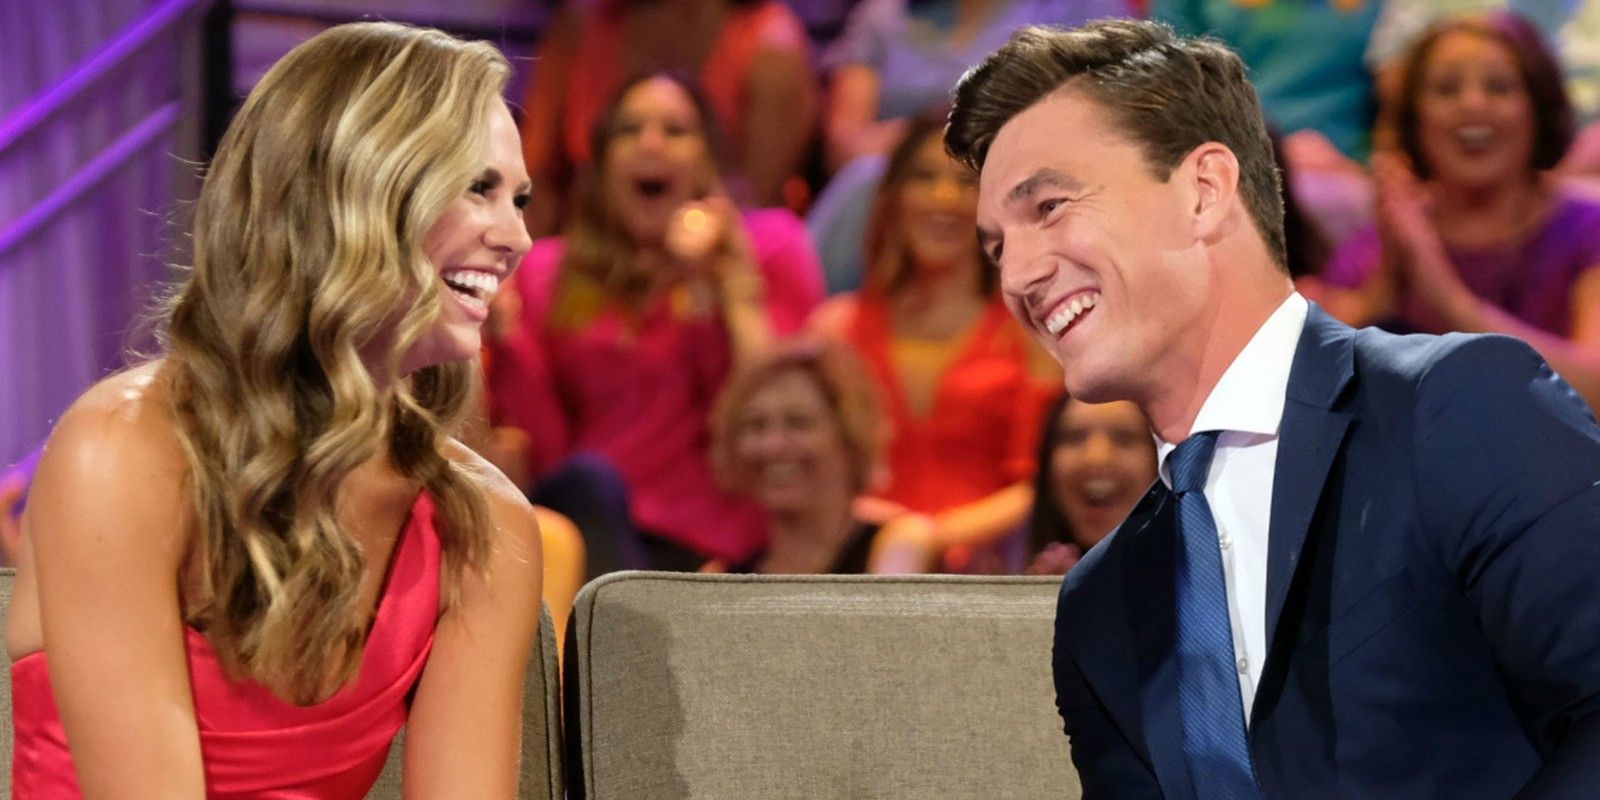 Hannah is not sure she's ready to endorse Tyler as next Bachelor